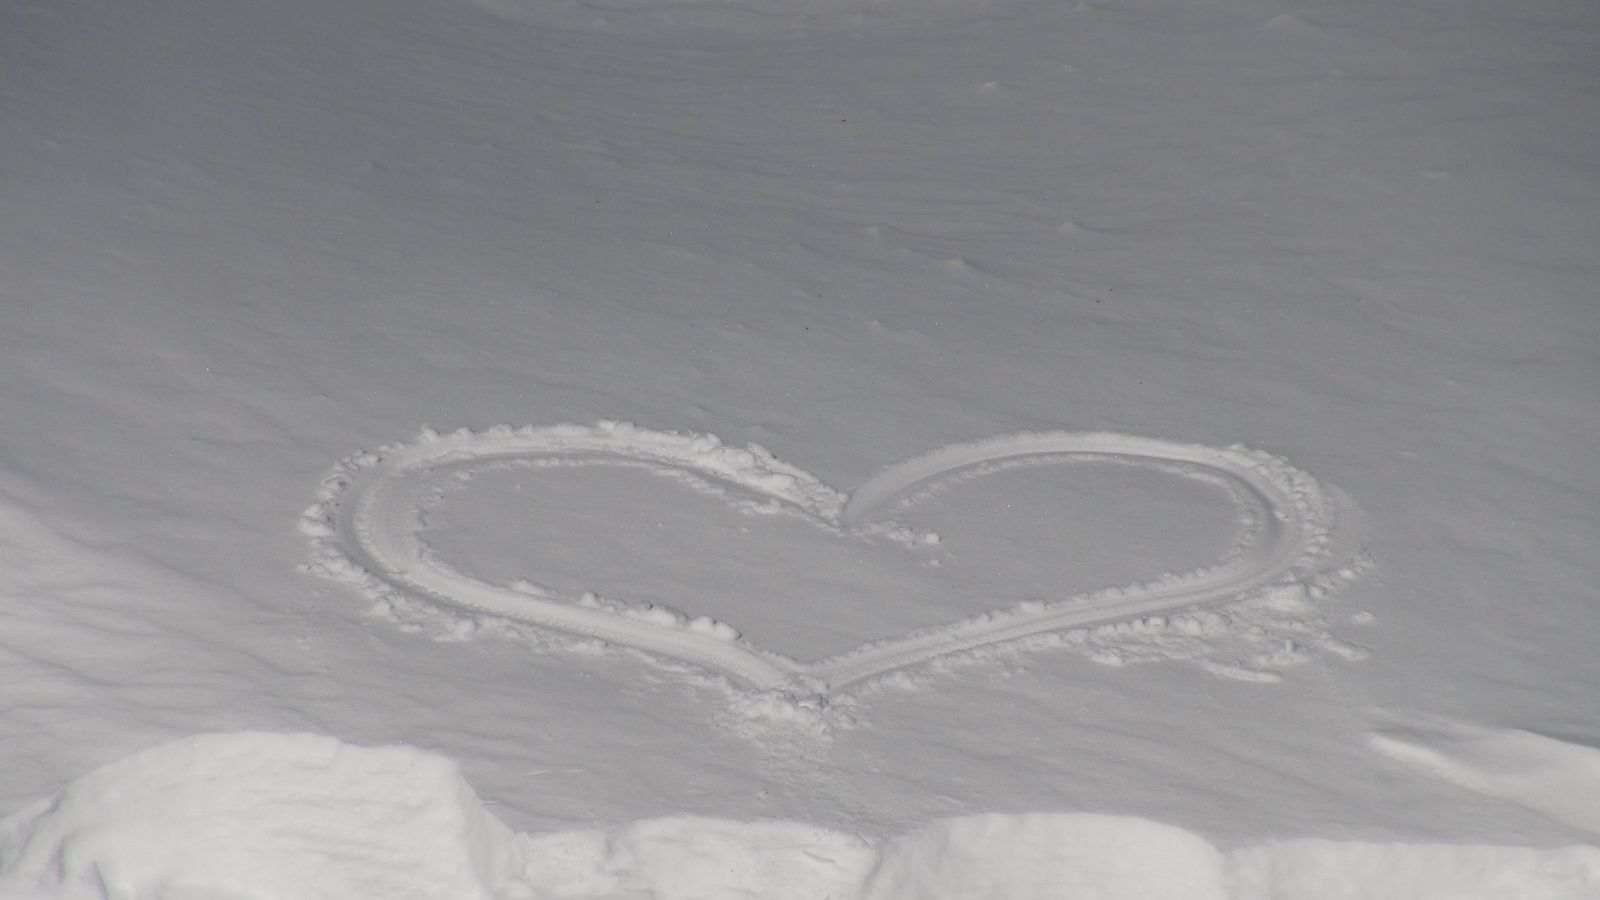 Heart in the Snow